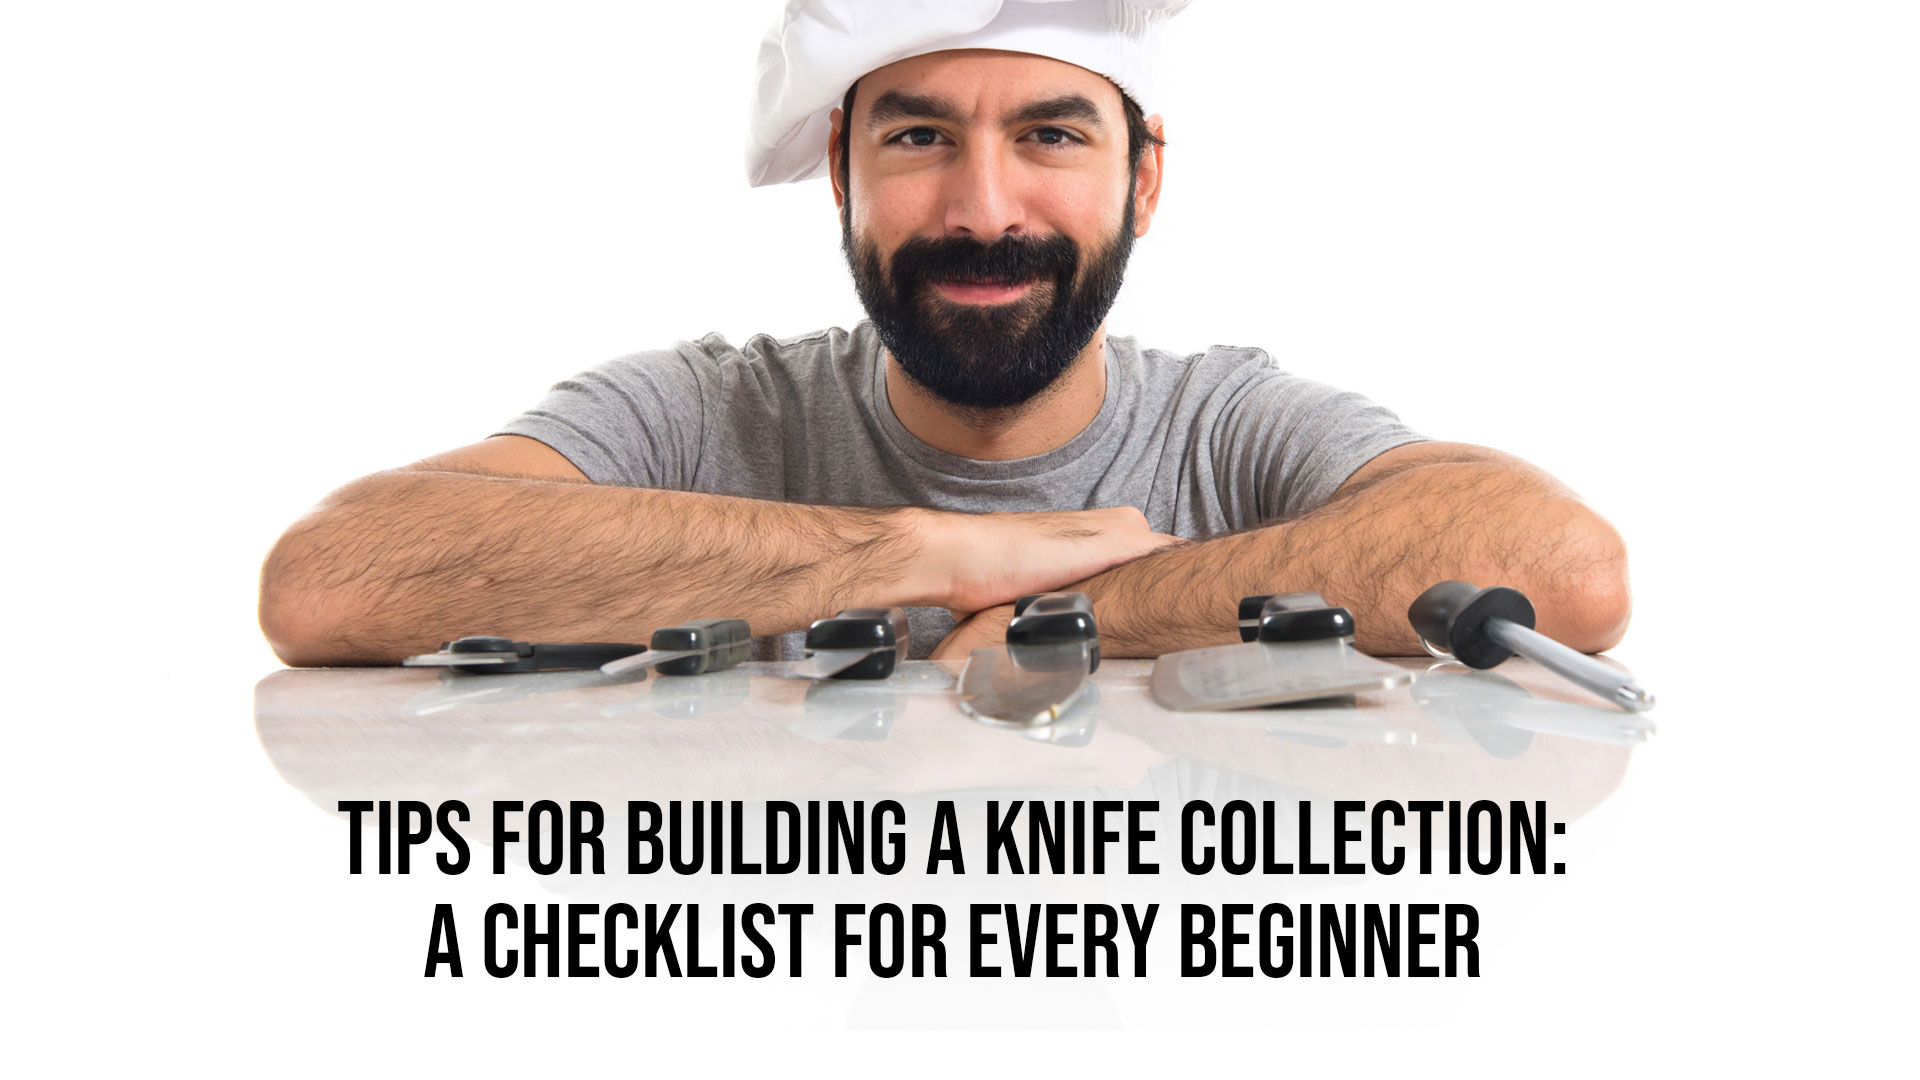 Tips-for-Building-a-Knife-Collection-A-Checklist-for-Every-Beginner